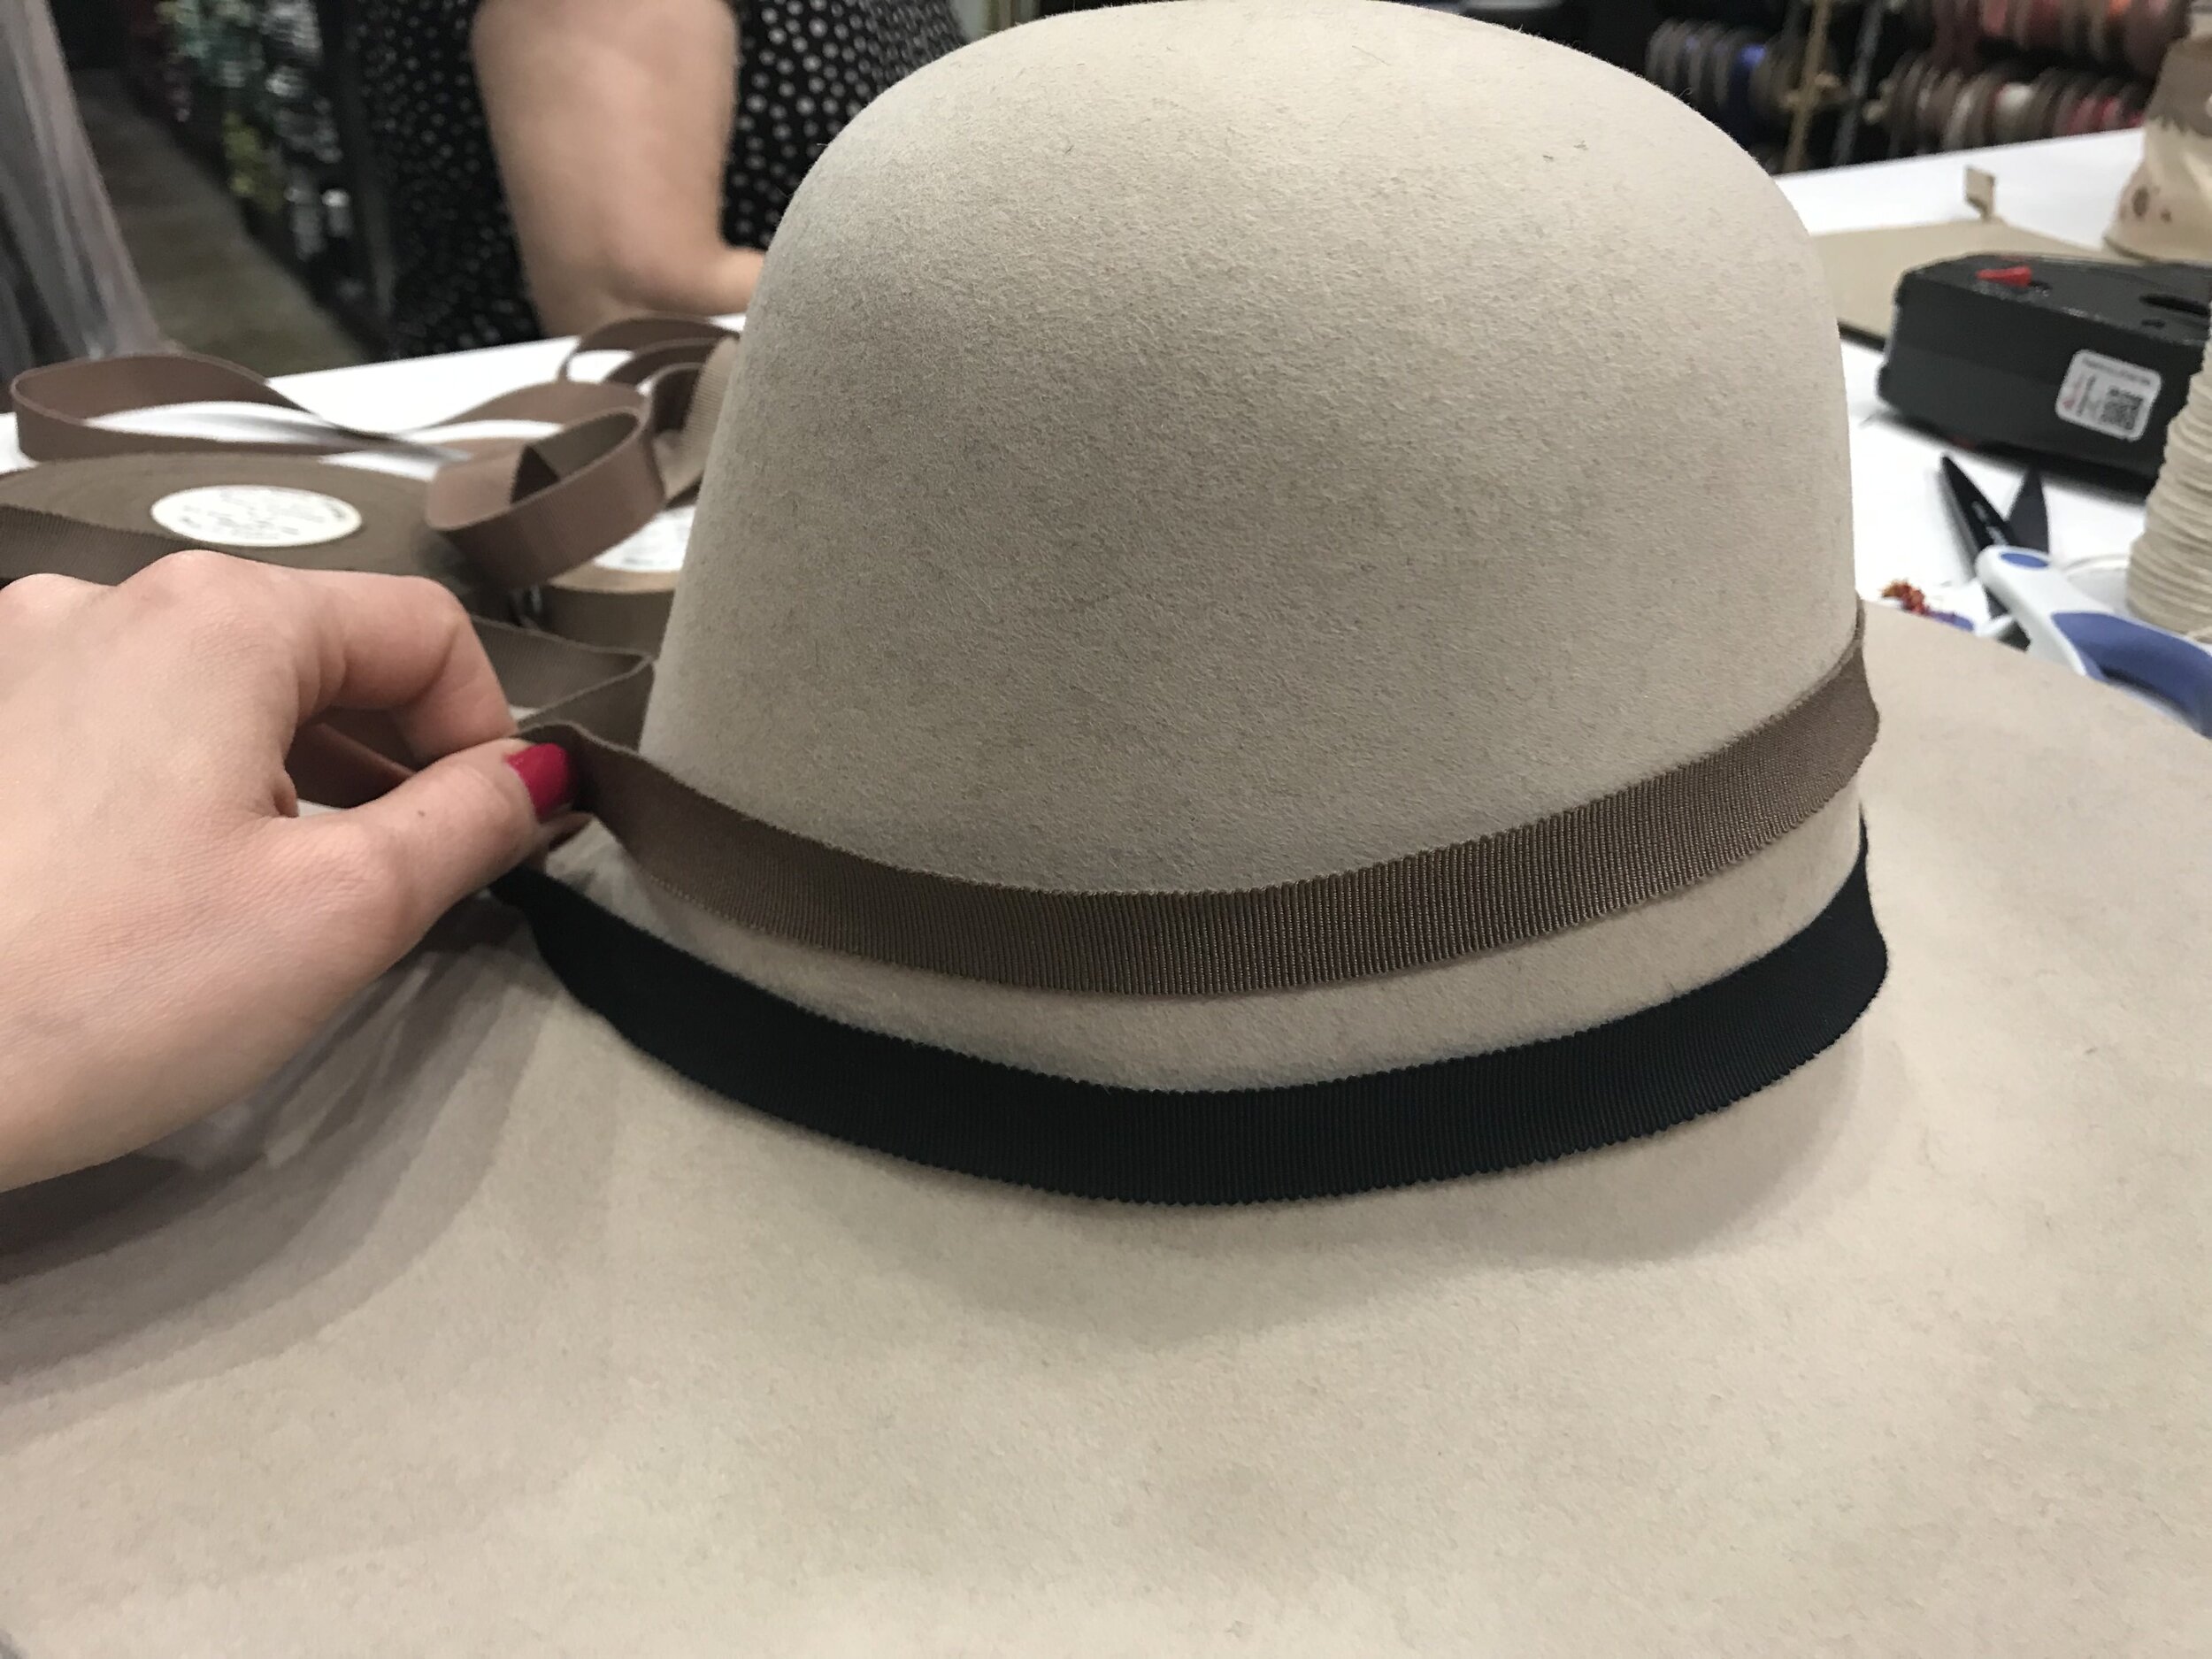 Sourcing the hat body and grosgrain ribbons